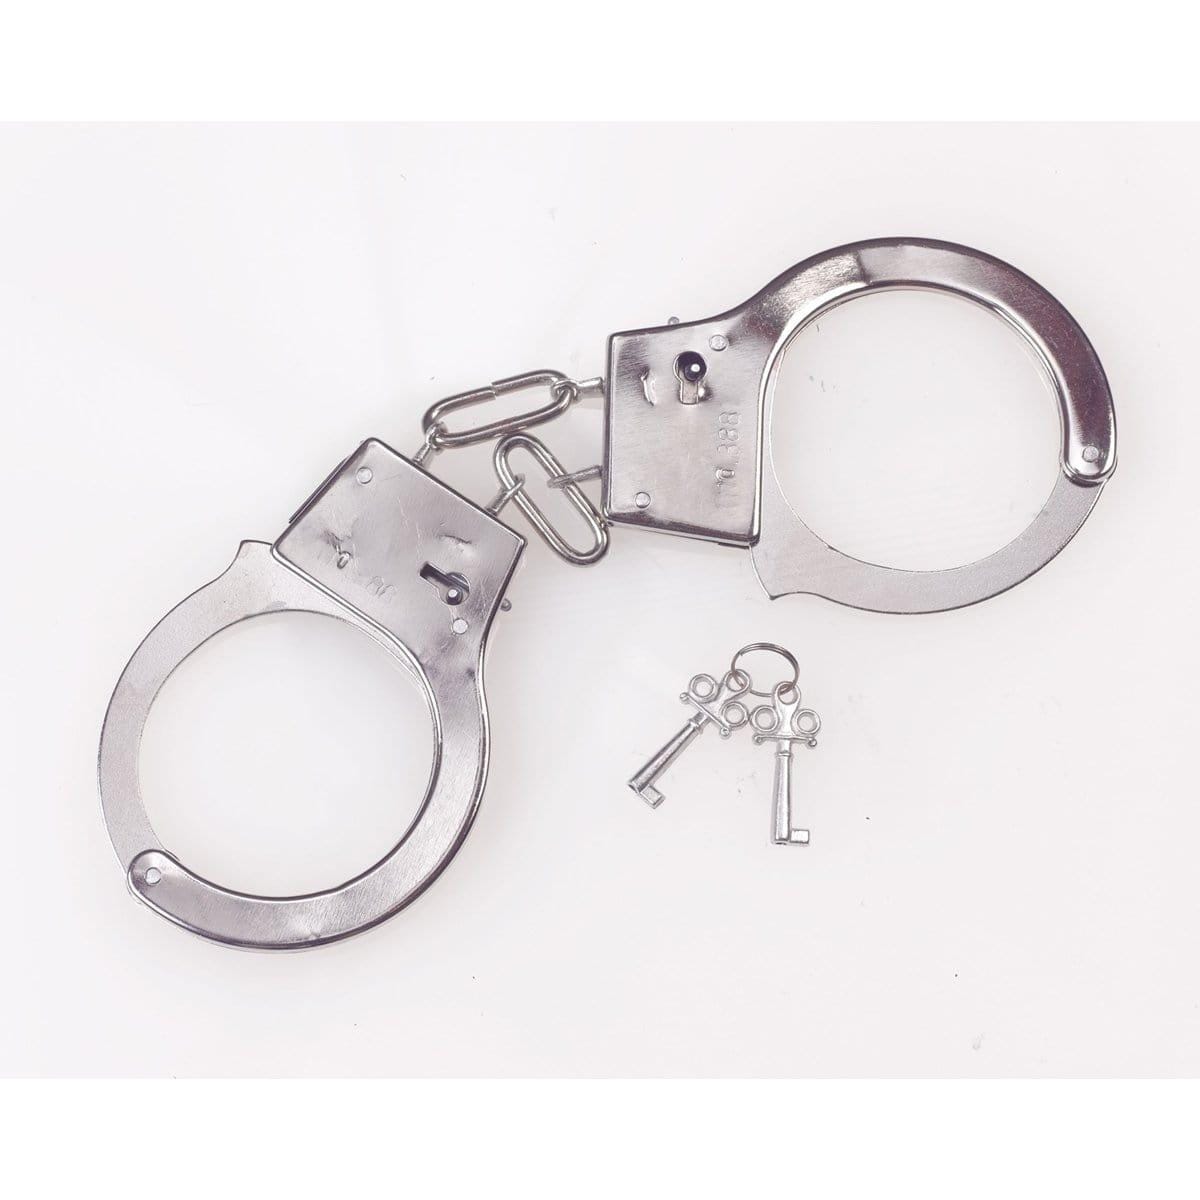 Buy Costume Accessories Lightweight metal handcuffs sold at Party Expert